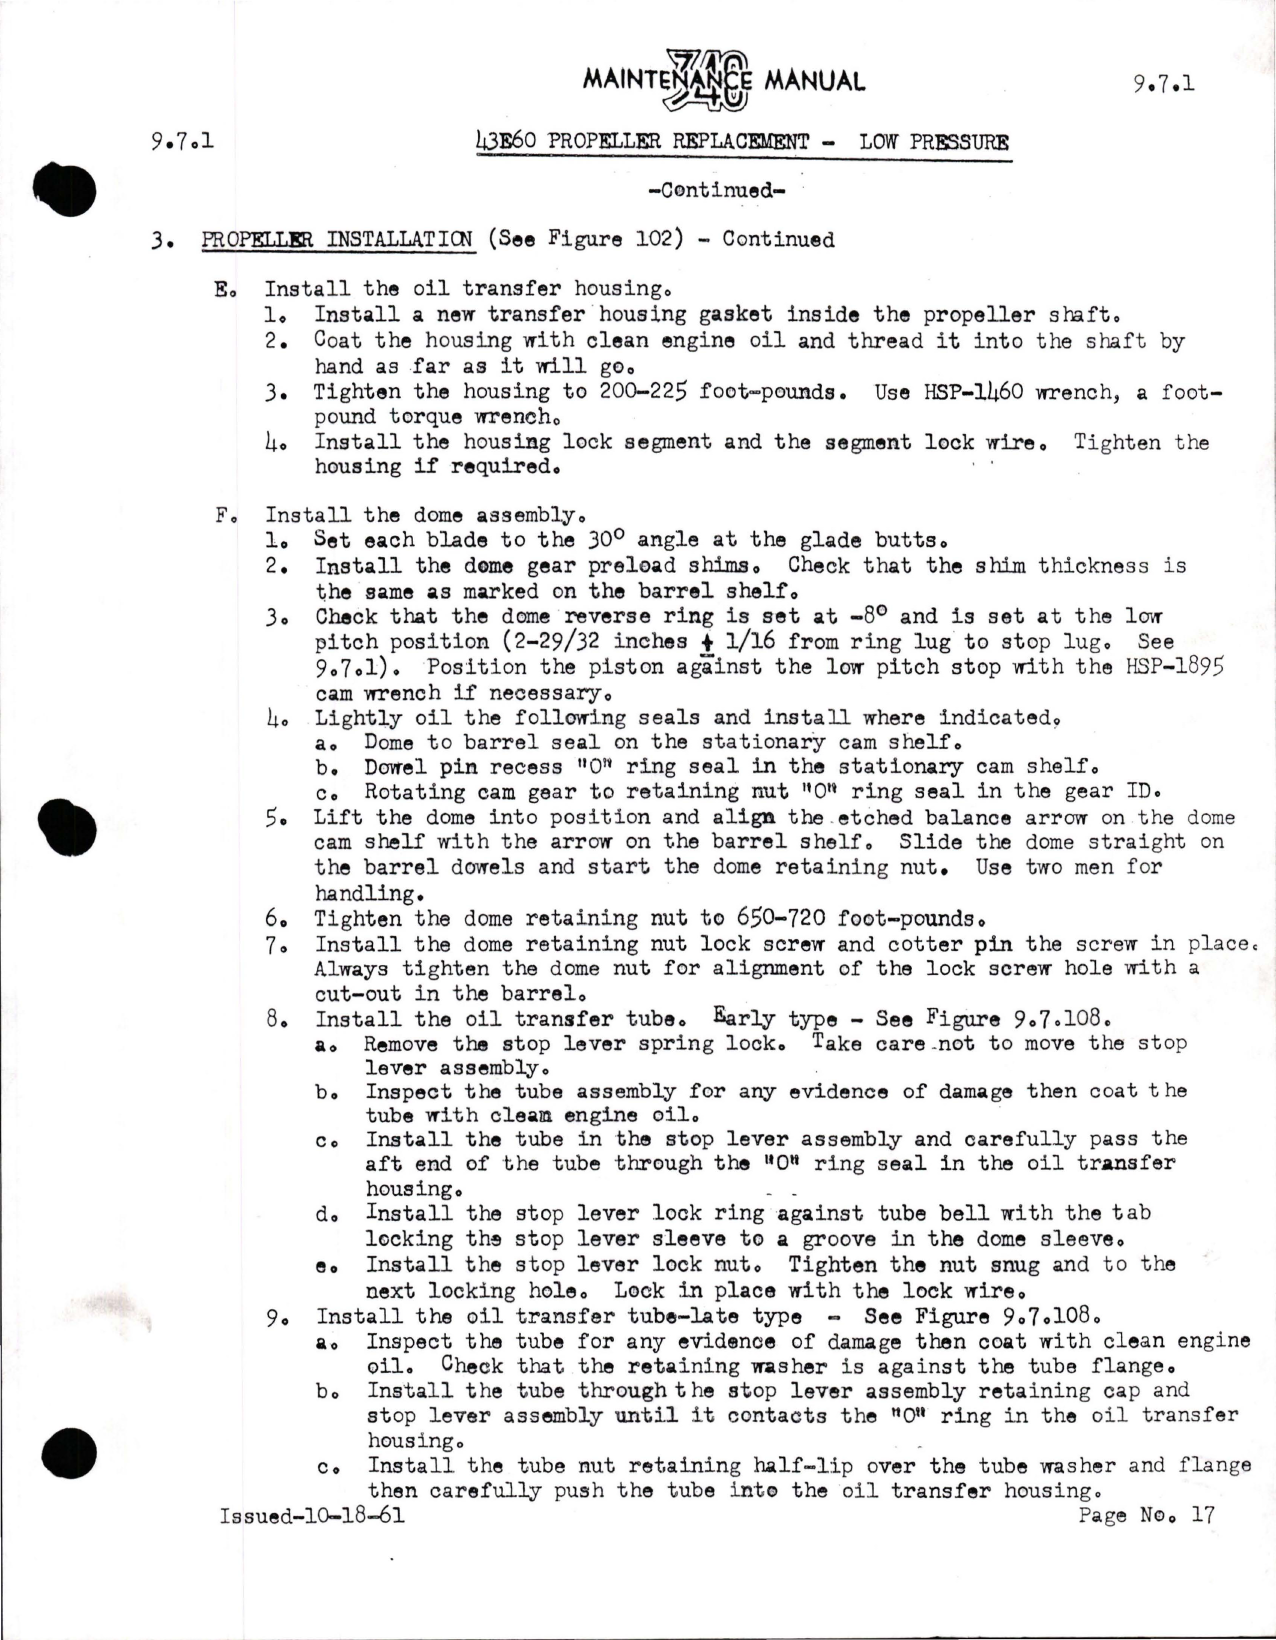 Sample page 5 from AirCorps Library document: Maintenance Manual for 43E60 Propeller